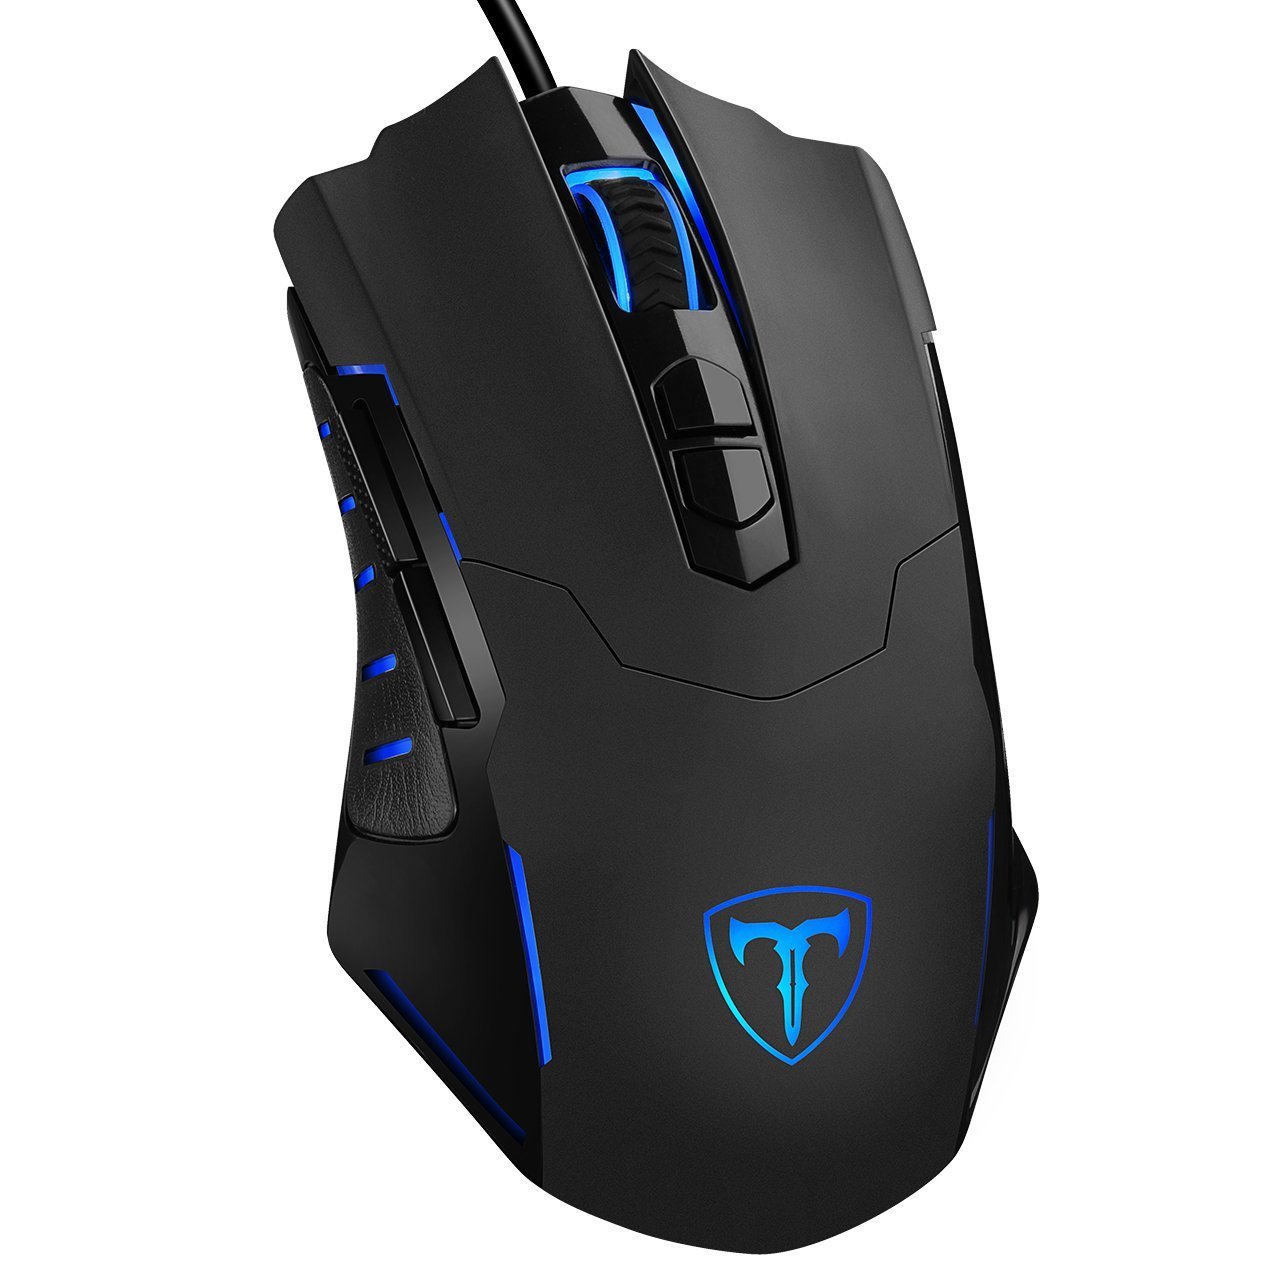 Pictek Gaming Mouse Review, Is This The Best Gaming Mouse For A Low